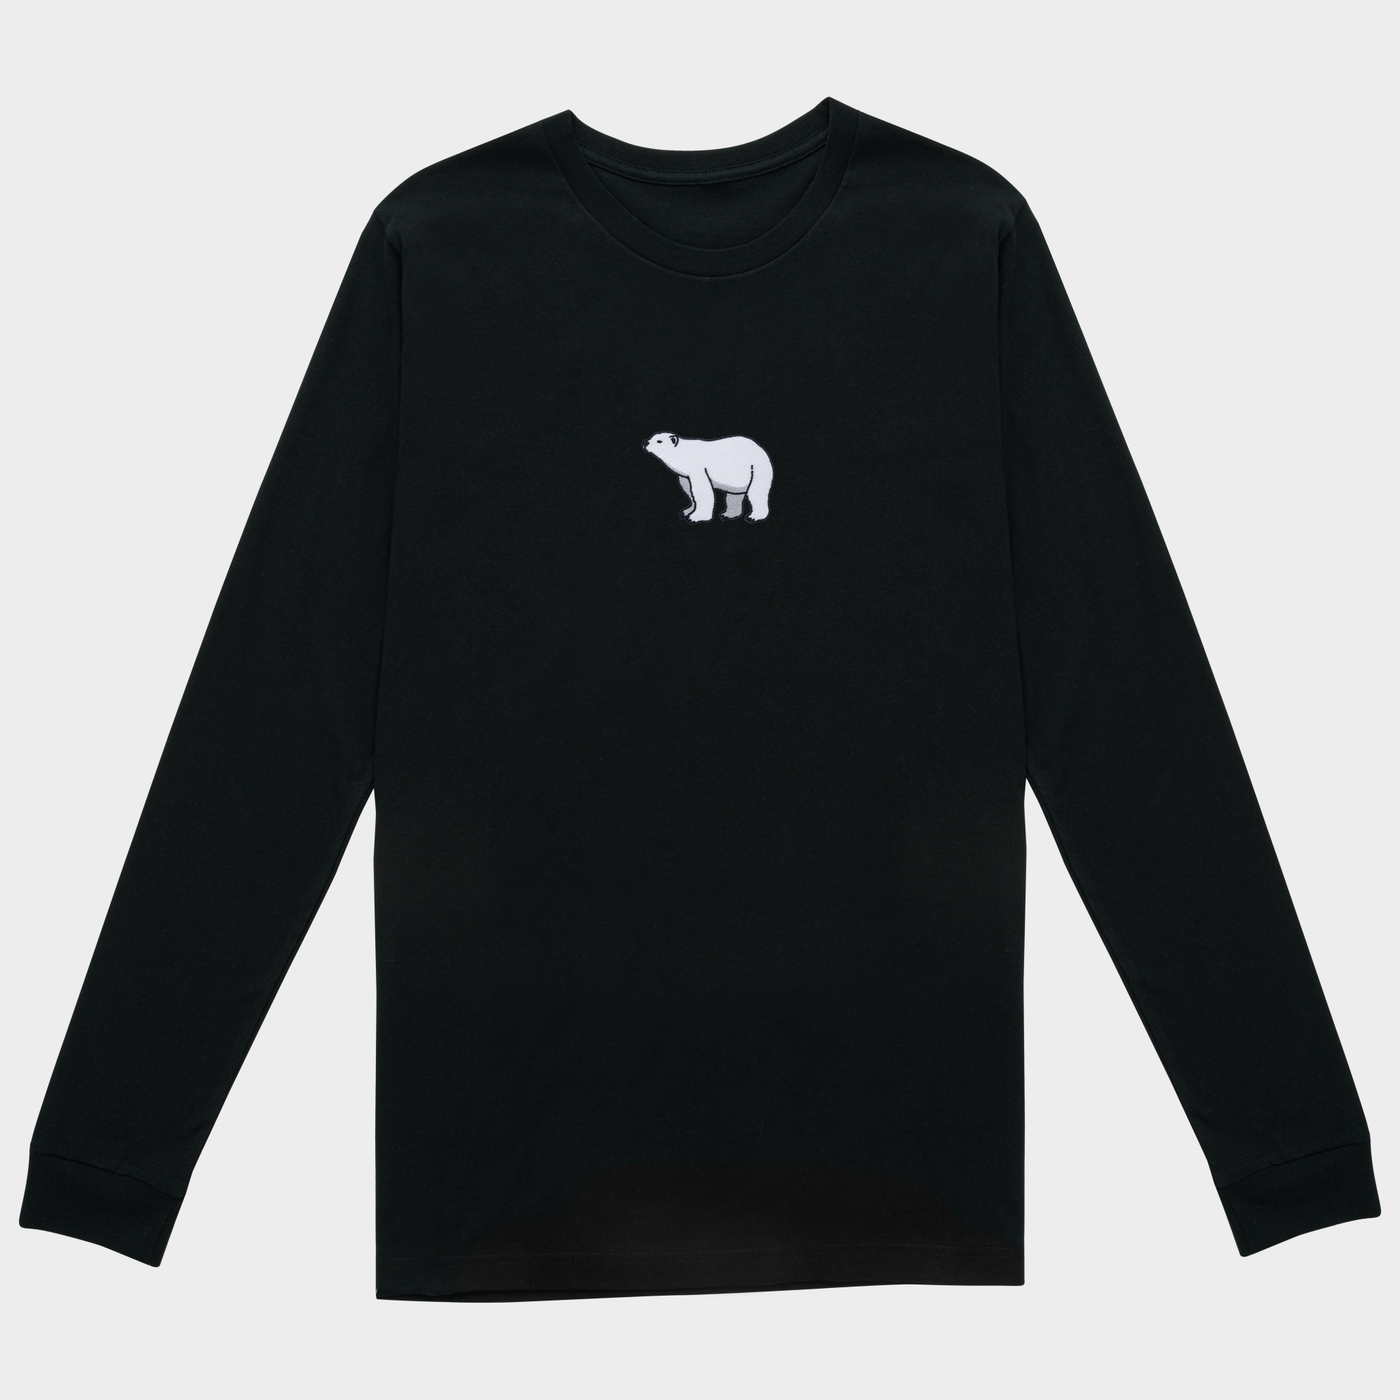 Bobby's Planet Women's Embroidered Polar Bear Long Sleeve Shirt from Arctic Polar Animals Collection in Black Color#color_black